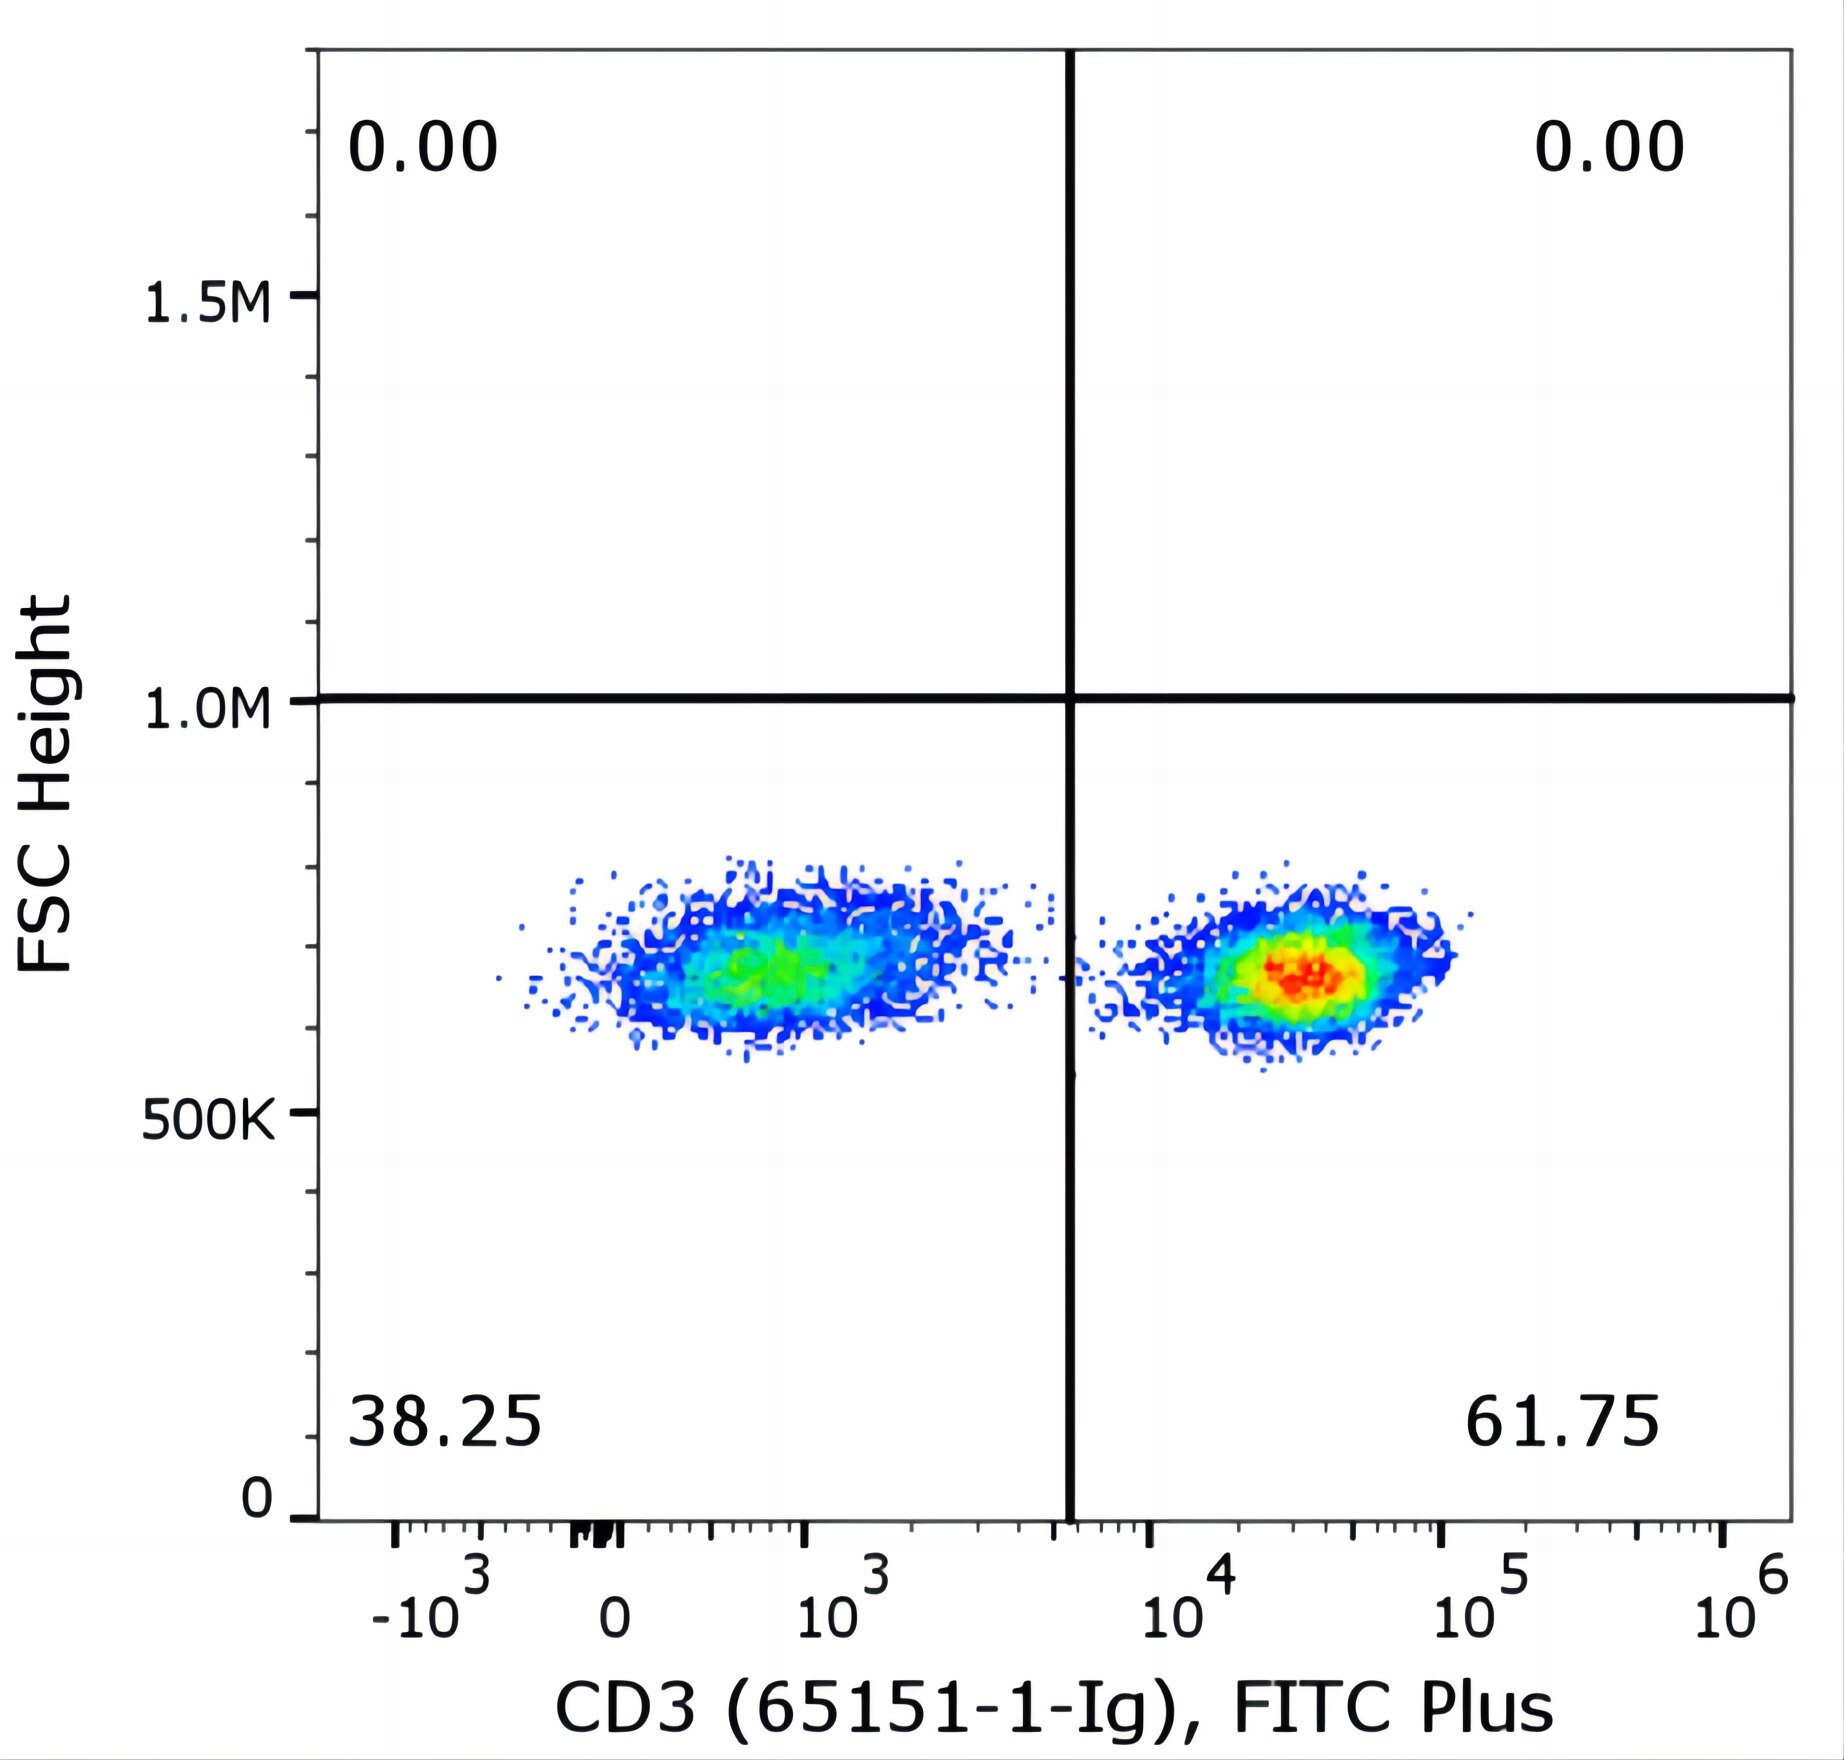 Flow cytometry of PBMC. 1X10^6 human peripheral blood mononuclear cells (PBMCs) were stained with anti-human CD3 antibody (clone UCHT1, 65151-1-Ig) labeled with FlexAble FITC Plus Kit (KFA028).